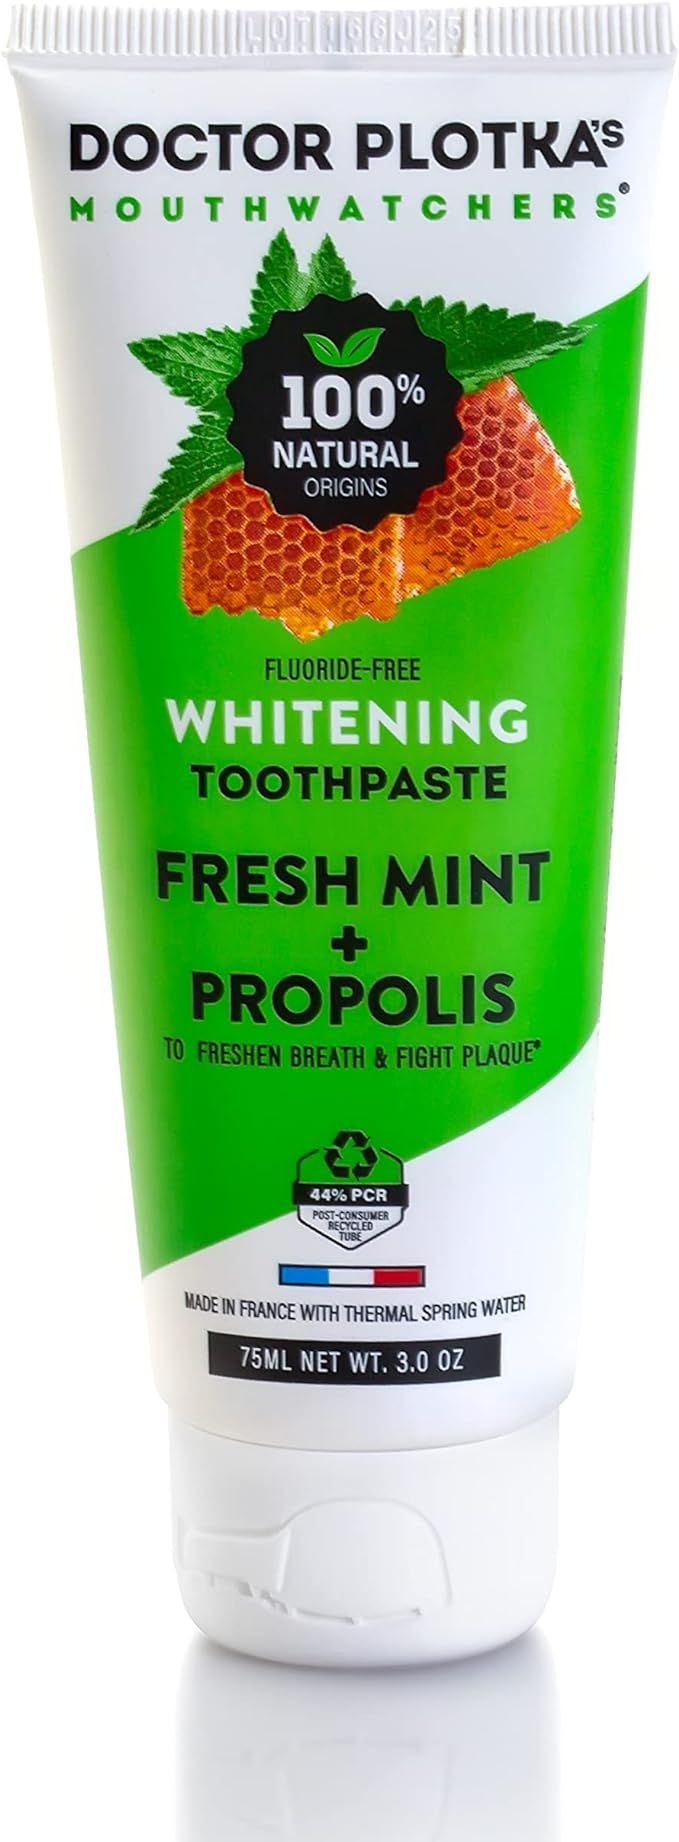 Dr Plotkas Natural Fluoride Free Whitening Toothpaste by Mouthwatchers | Organic Propolis and Fre... | Amazon (US)